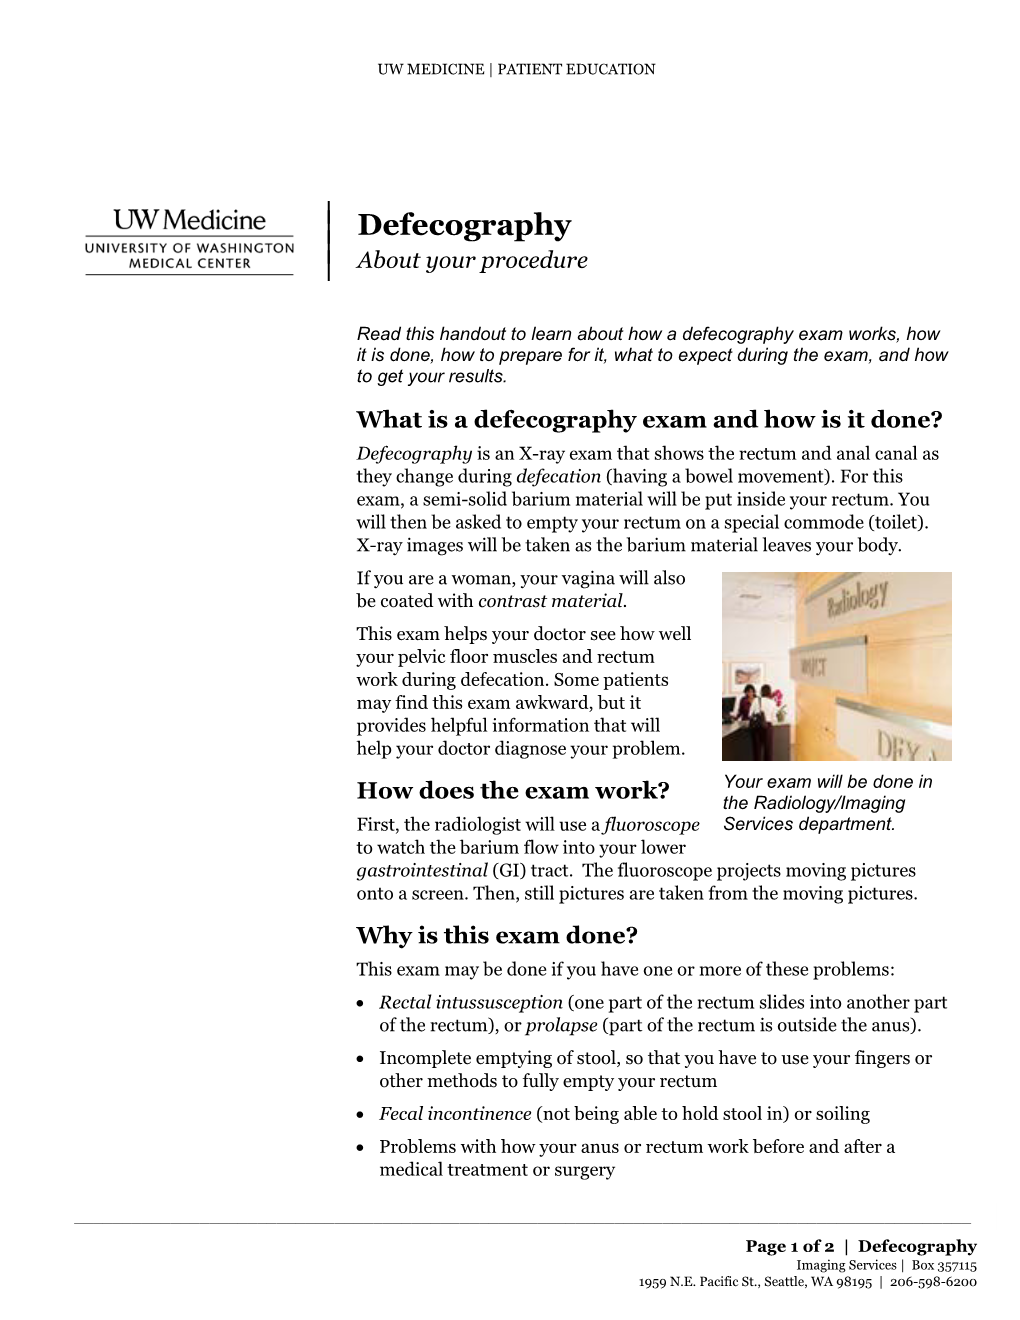 Defecography | About Your Procedure |